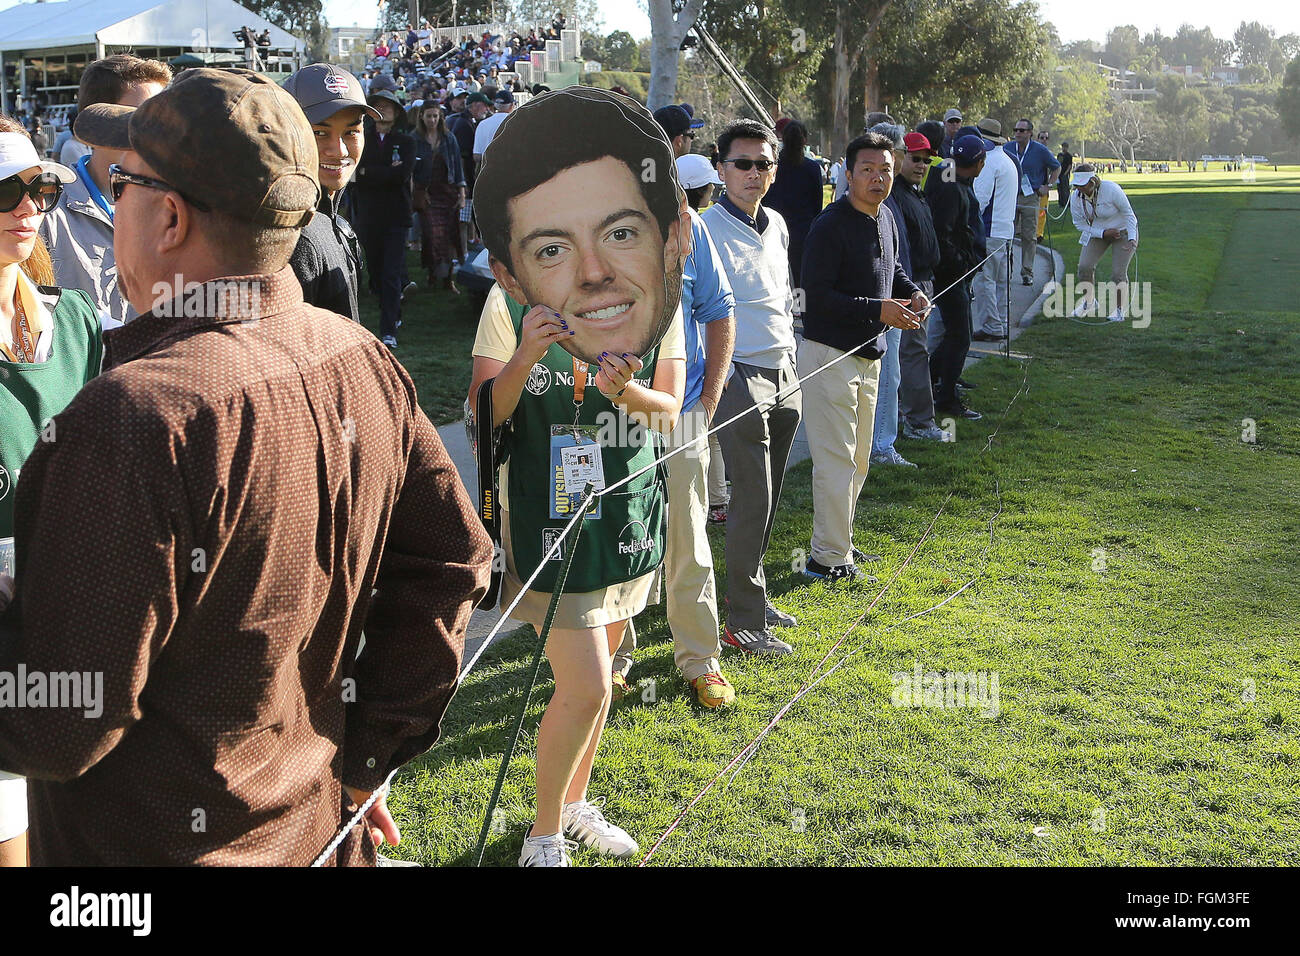 Pacific Palisades, CA, USA. 19th Feb, 2016. February 19, 2016: Rory McIlroy FatHead during the second round of the Northern Trust Open, Pacific Palisades, CA. Michael Zito/ESW/CSM/Alamy Live News Stock Photo